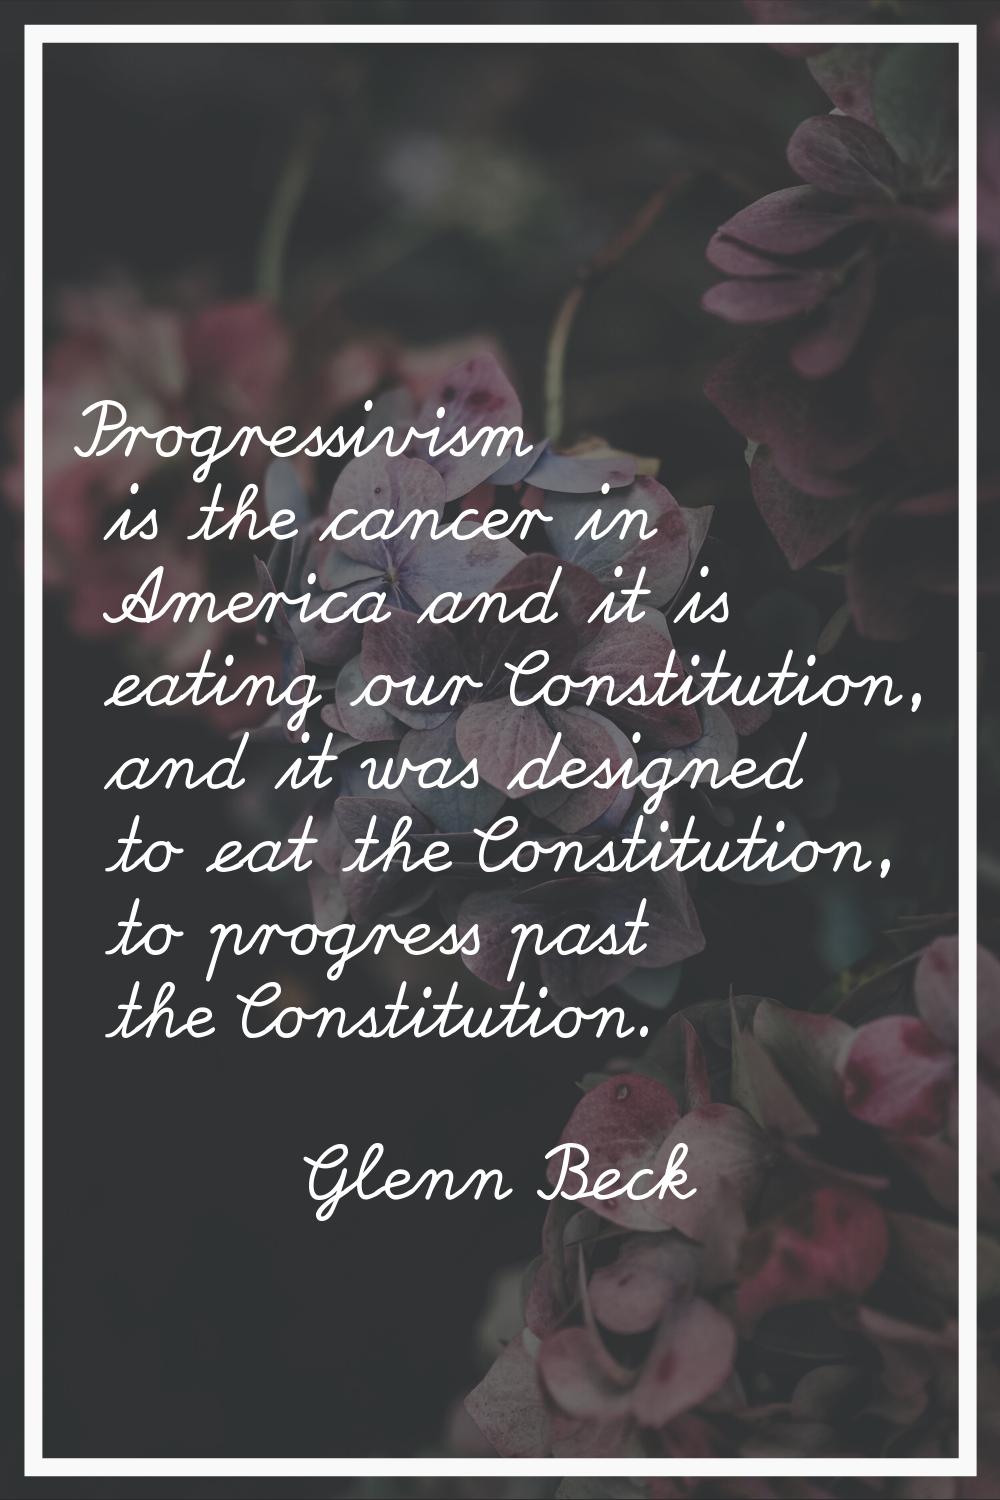 Progressivism is the cancer in America and it is eating our Constitution, and it was designed to ea